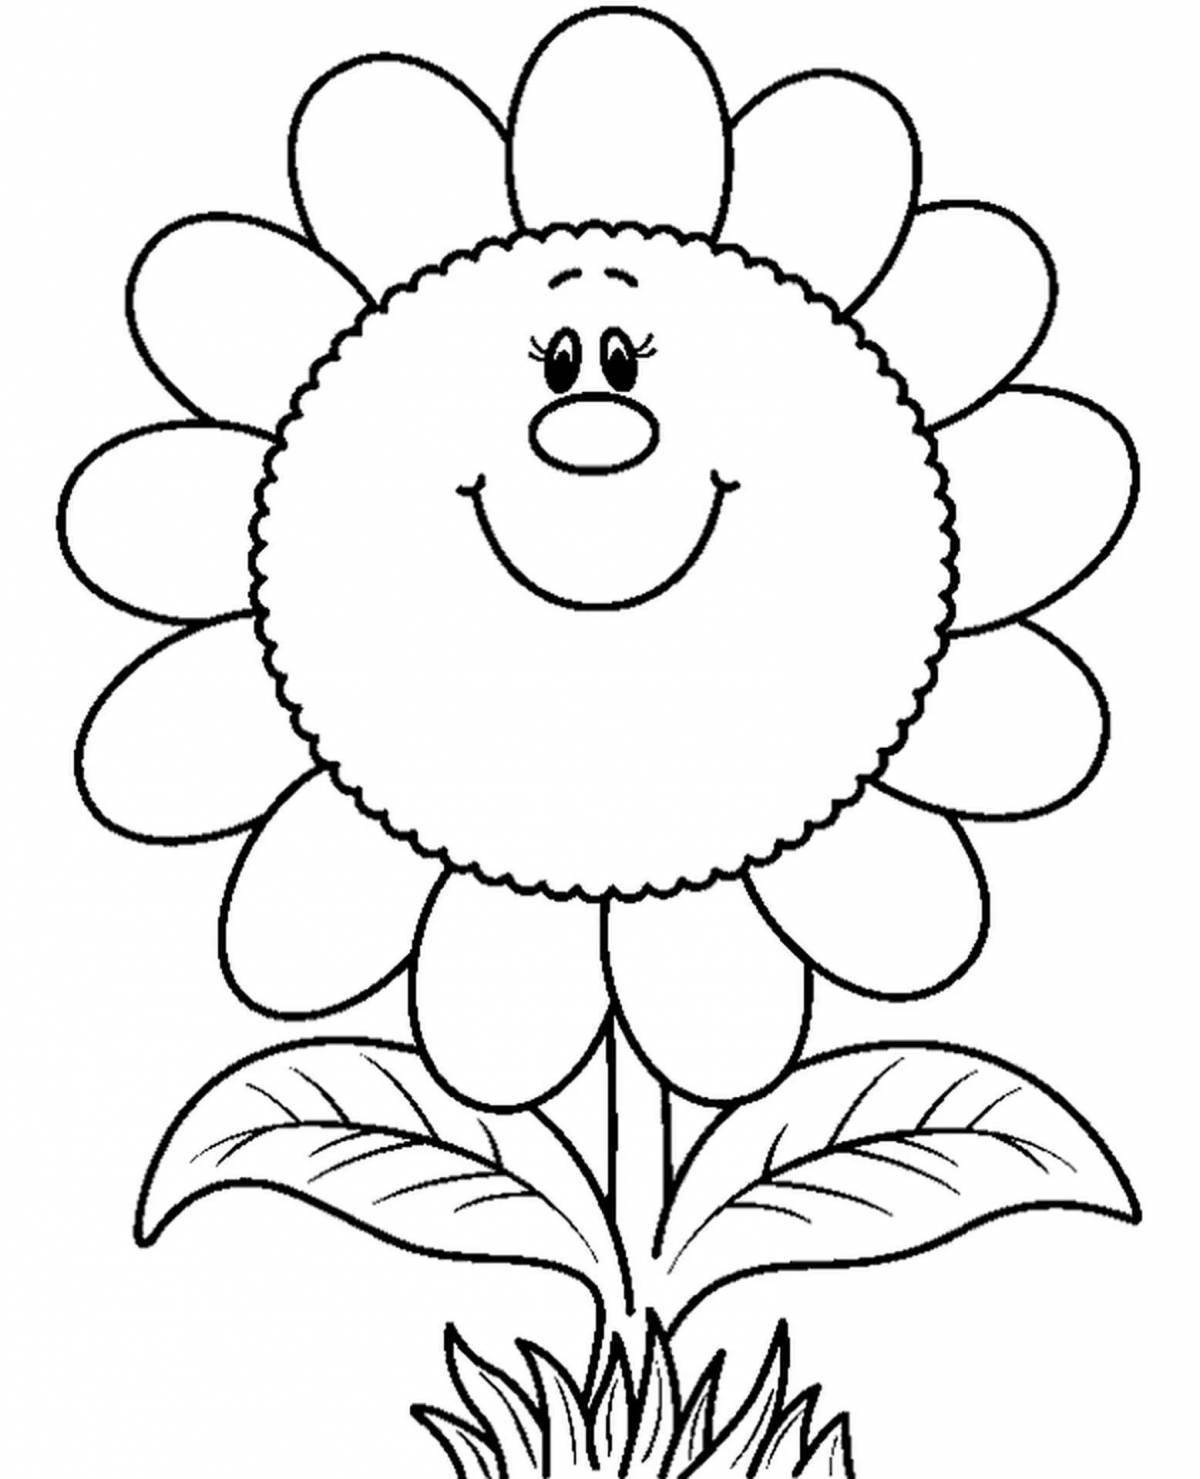 Delightful coloring flower for children 2-3 years old